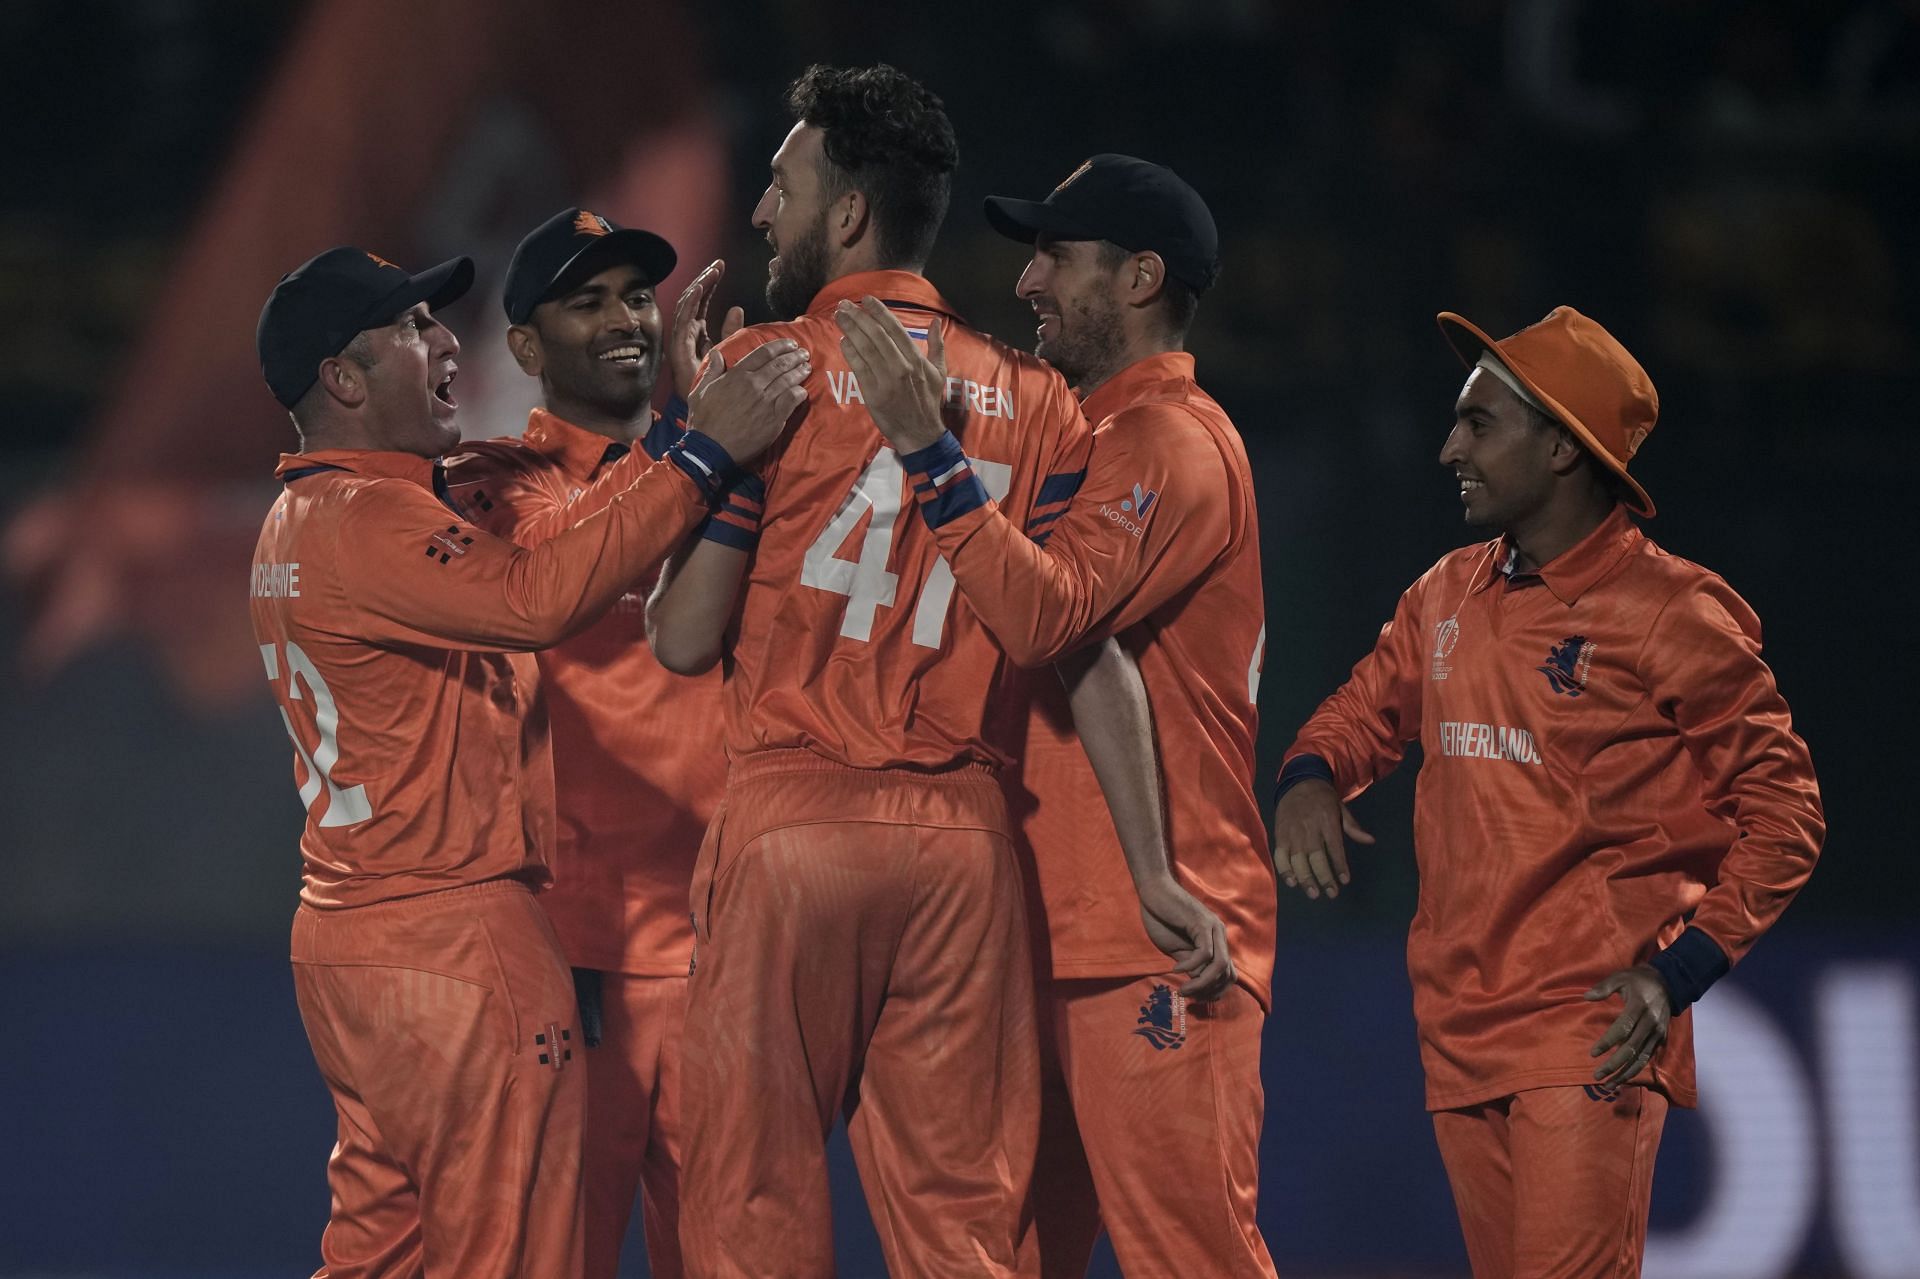 Dutch spirit soared and sinked South Africa